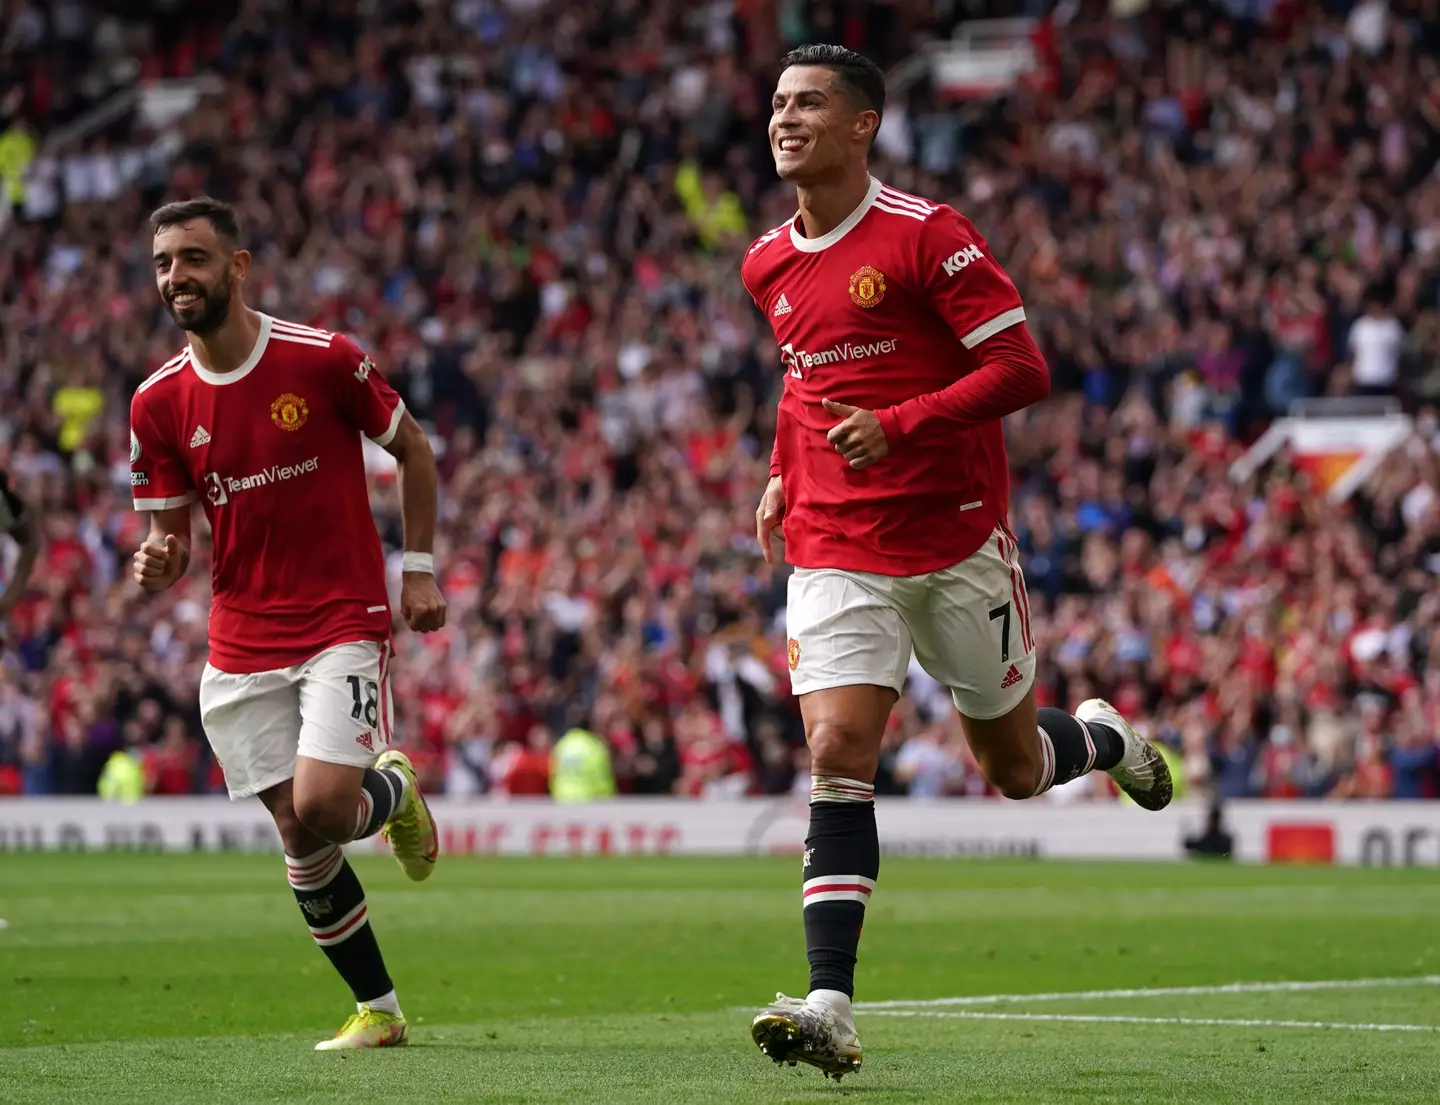 Ronaldo is already having an effect on United. Image: PA Images